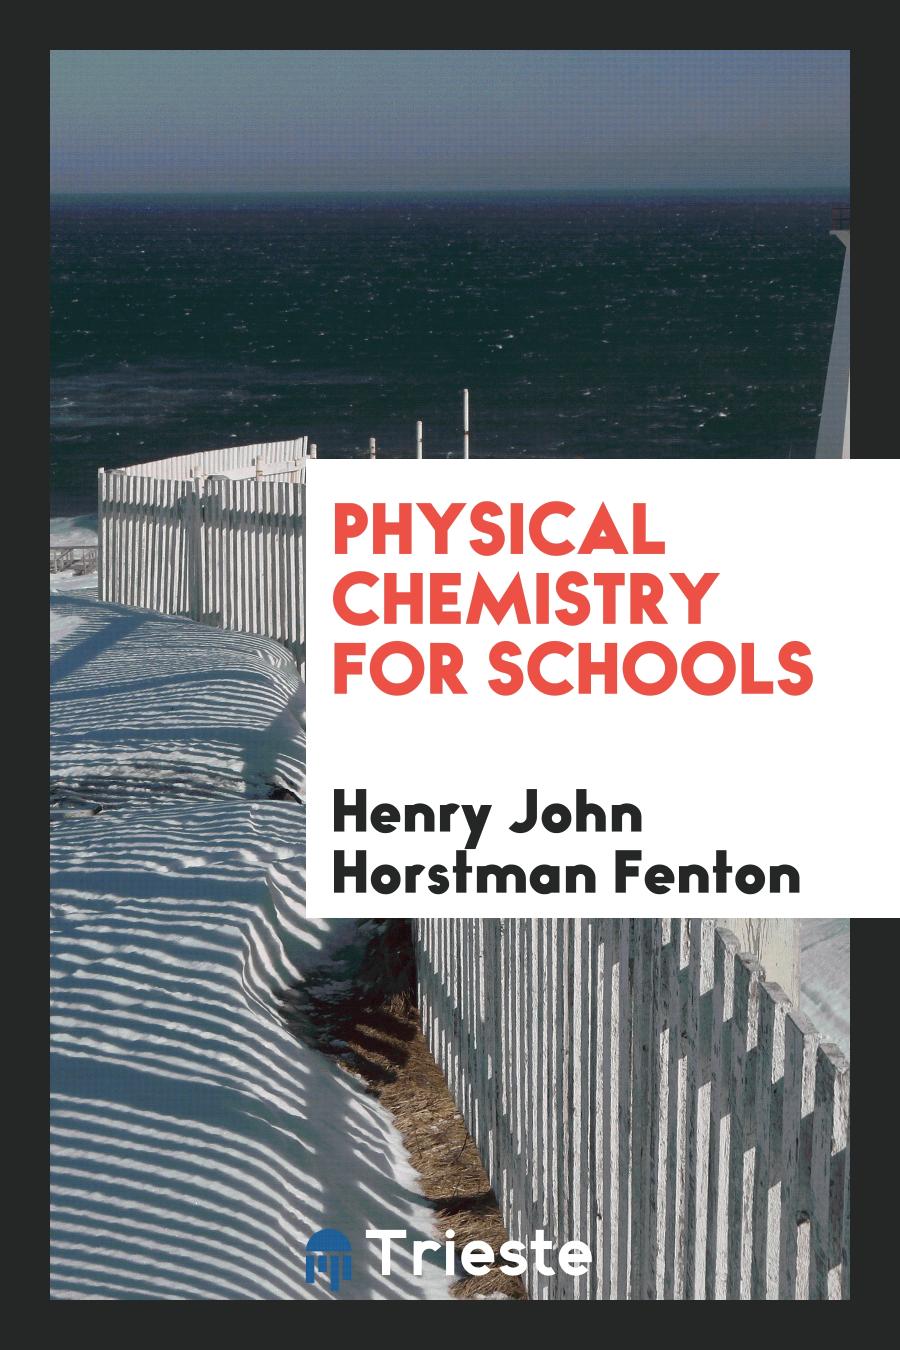 Physical Chemistry for Schools